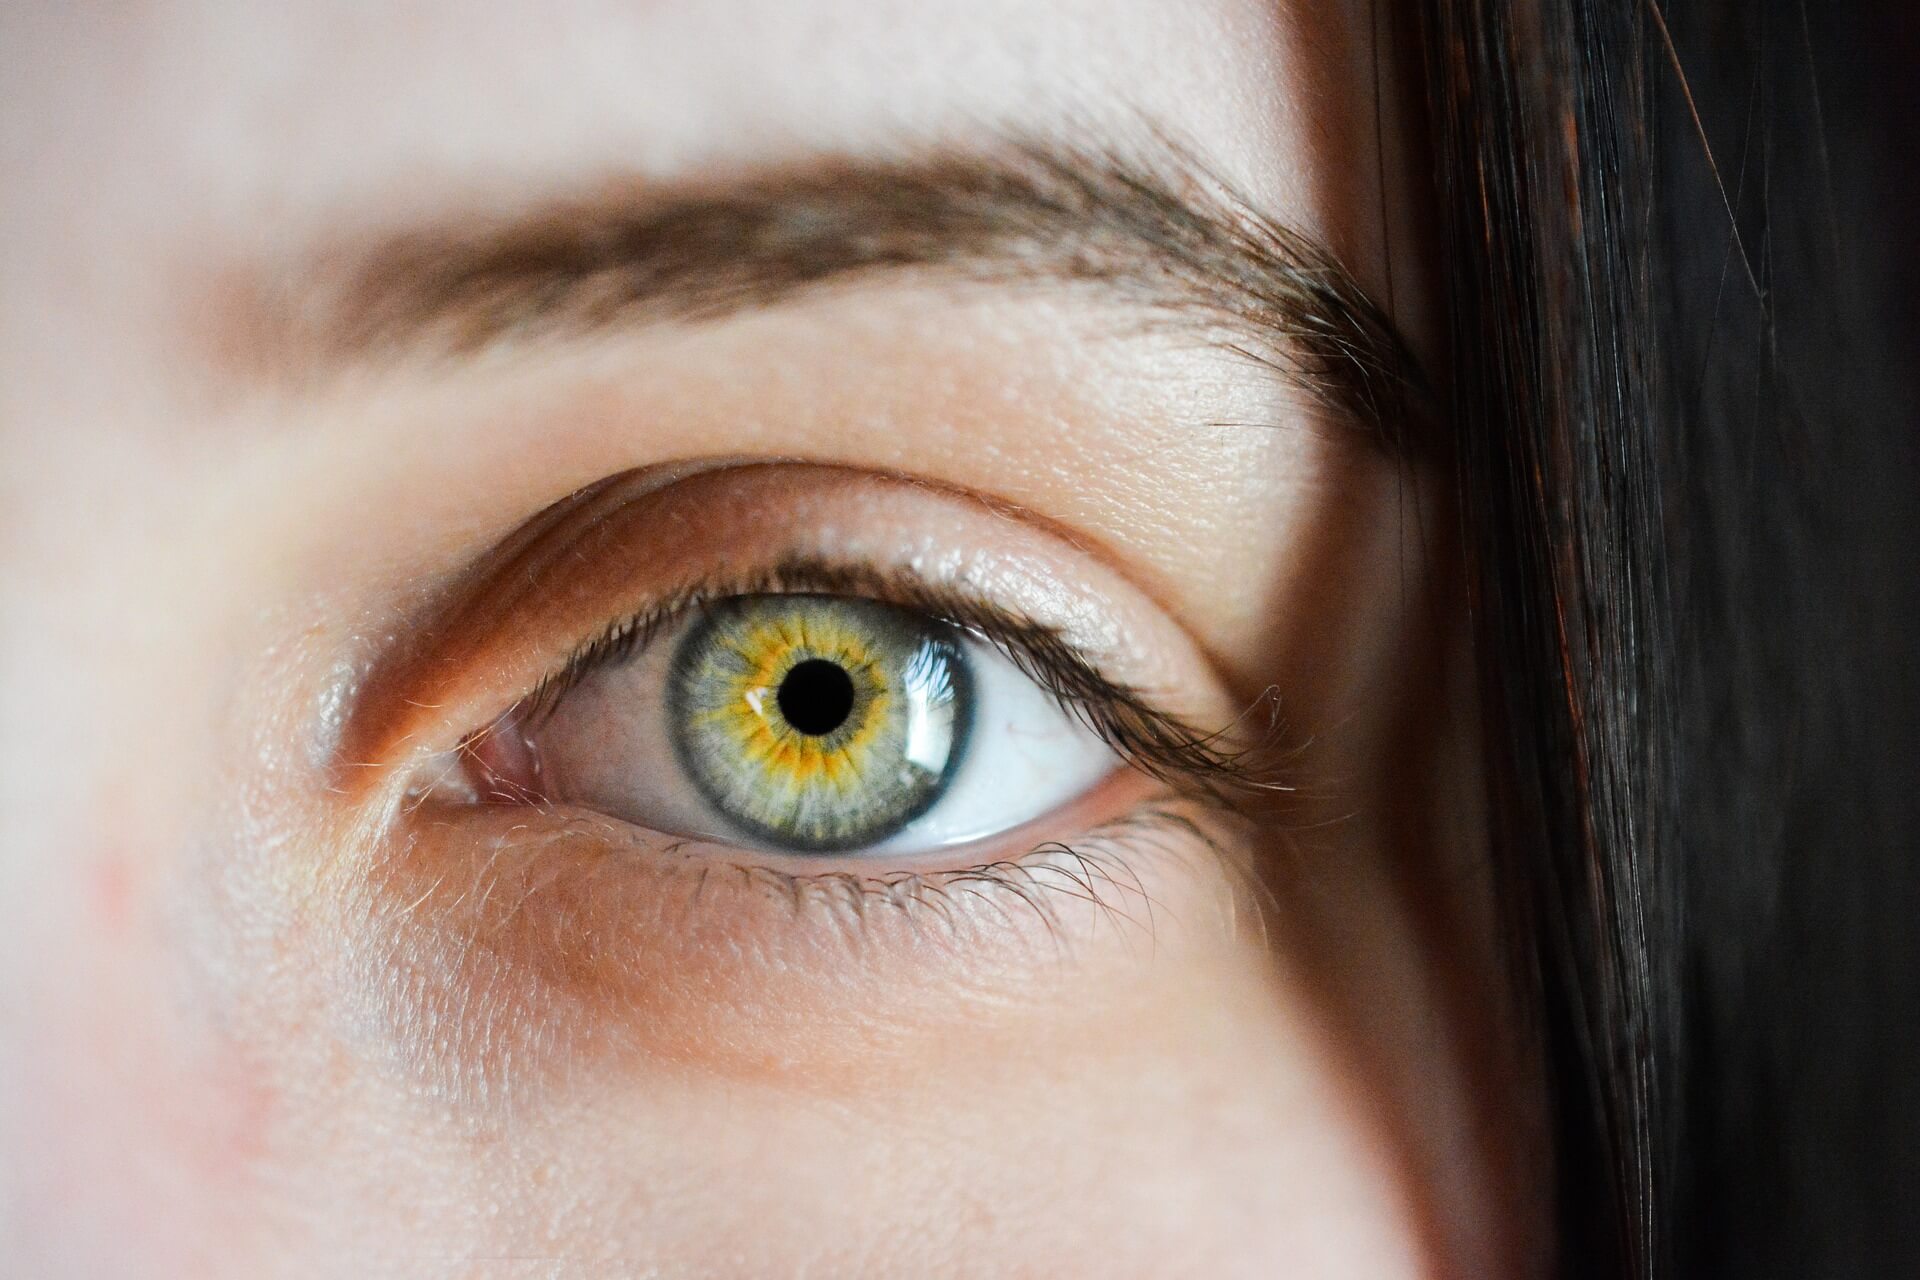 5 easy eye exercises to protect your vision